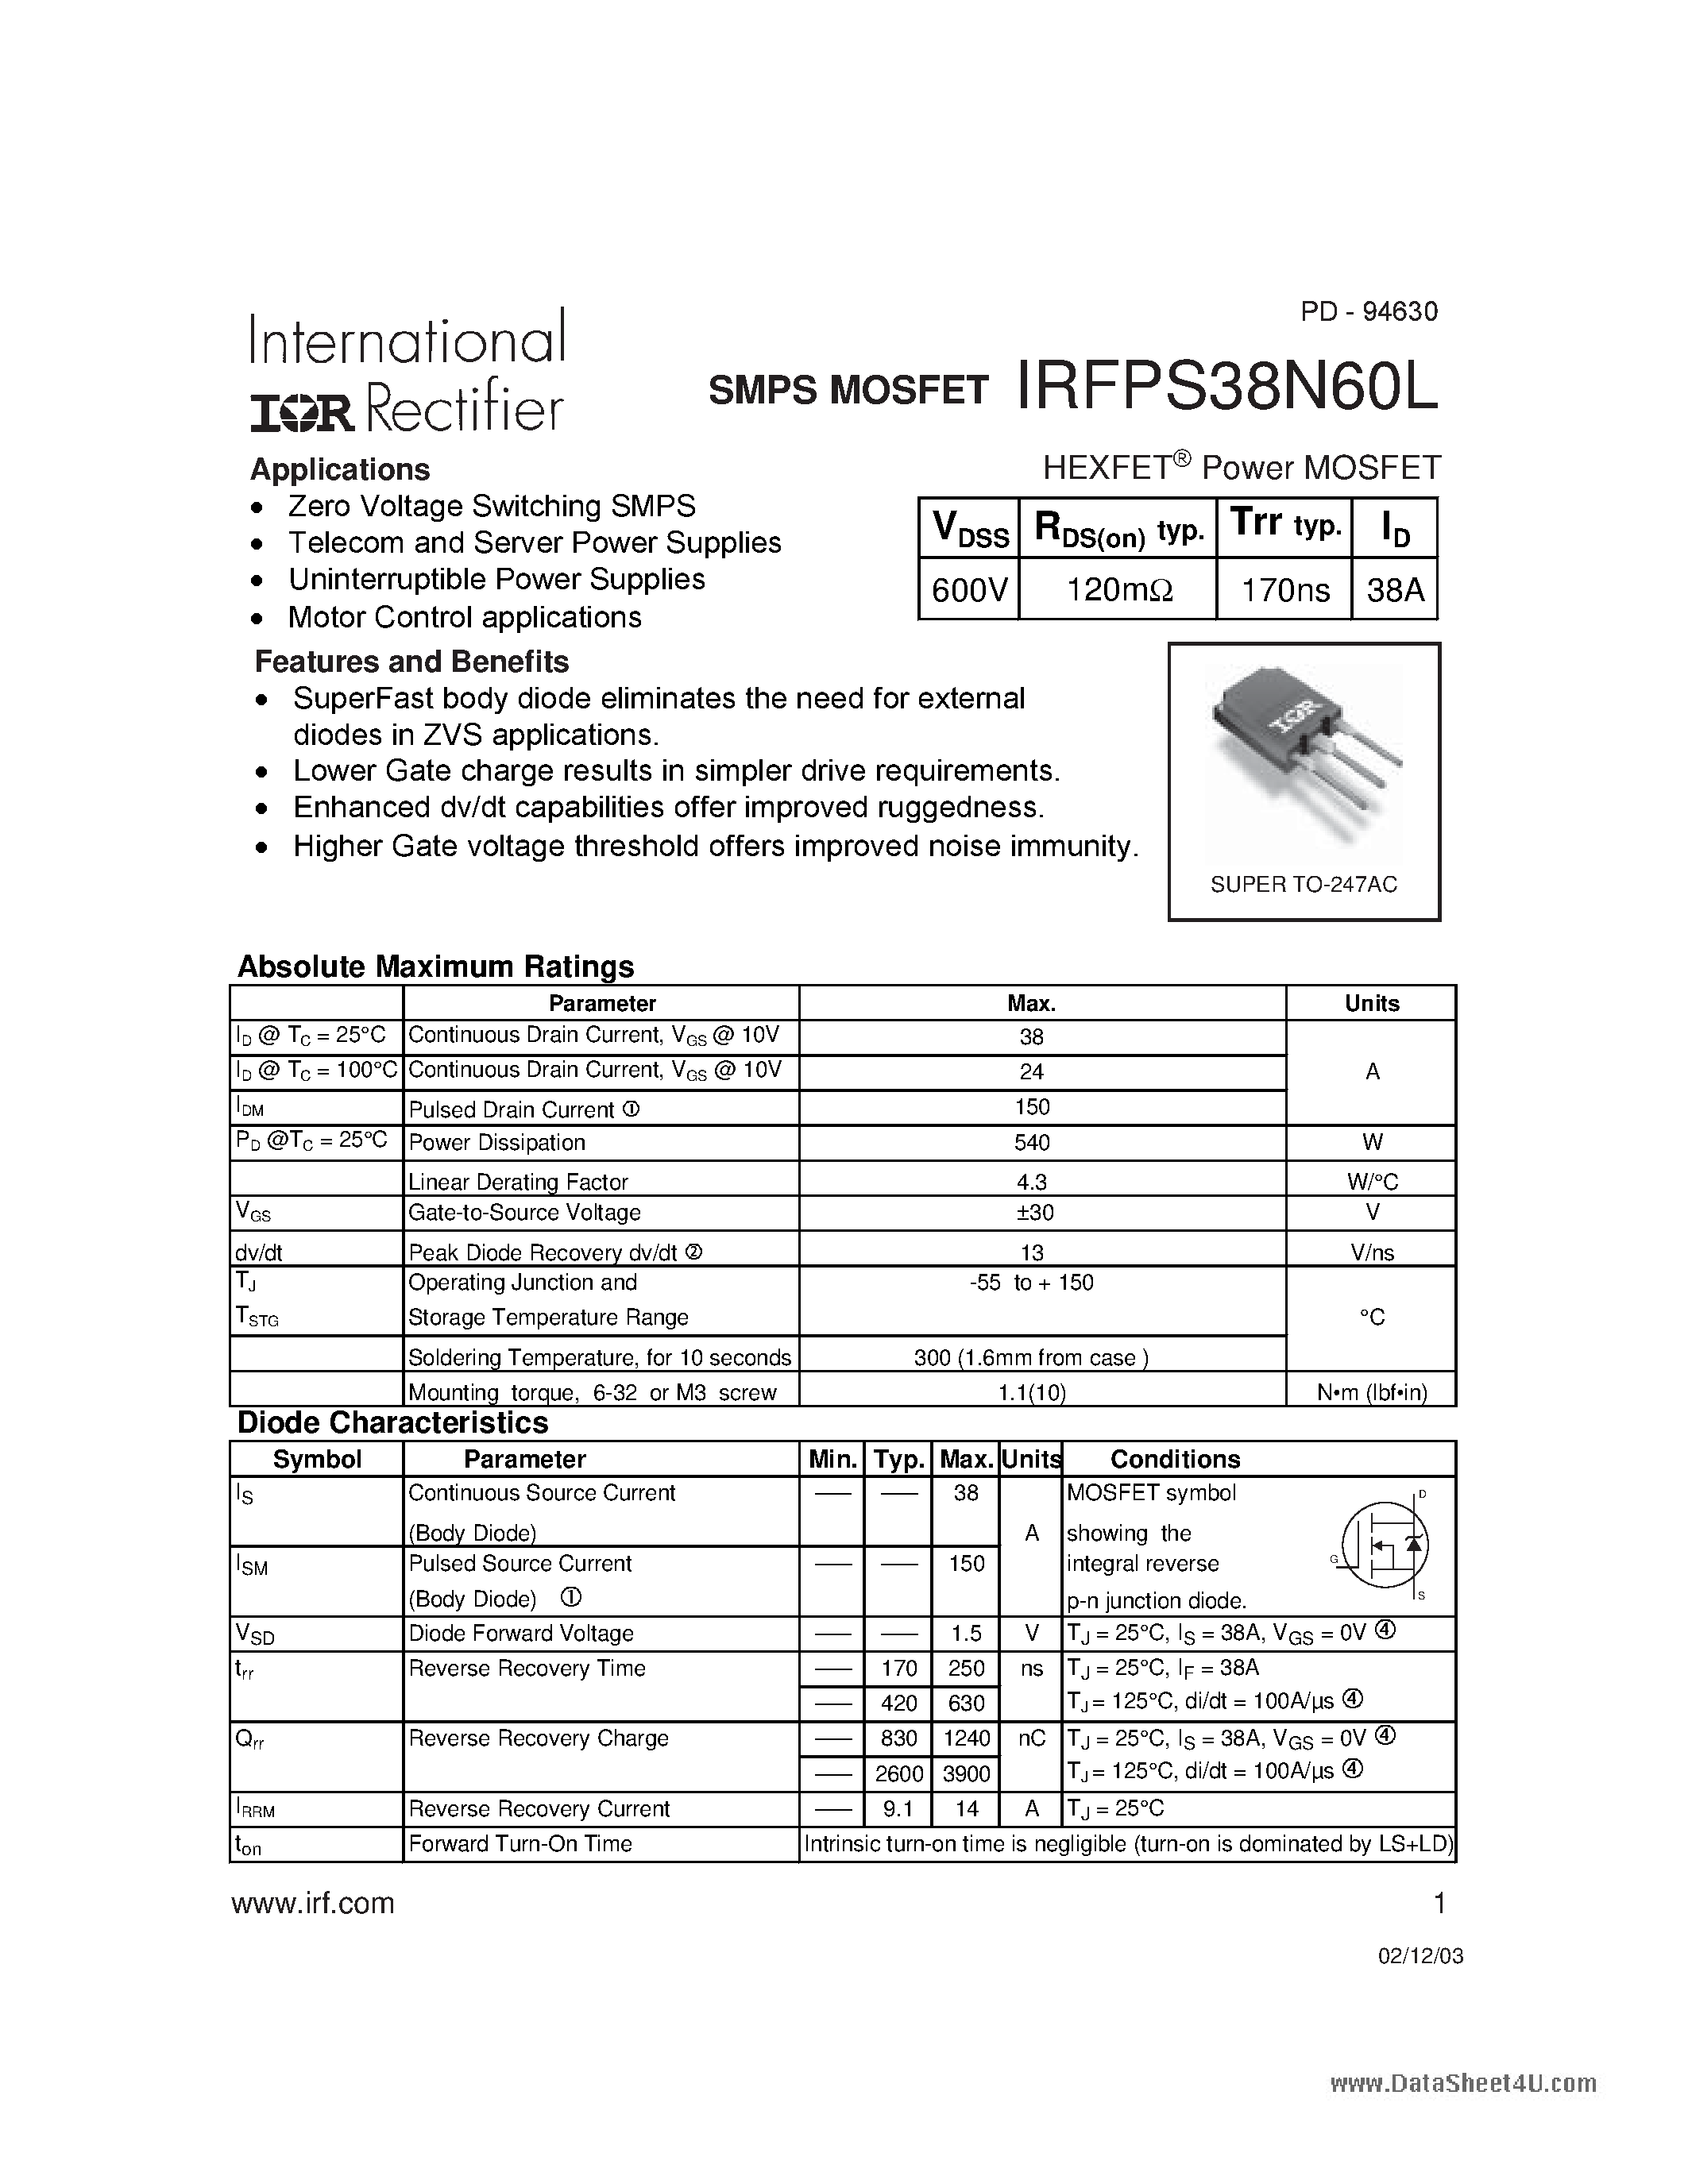 Даташит IRFPS38N60L - HEXFET Power MOSFET страница 1